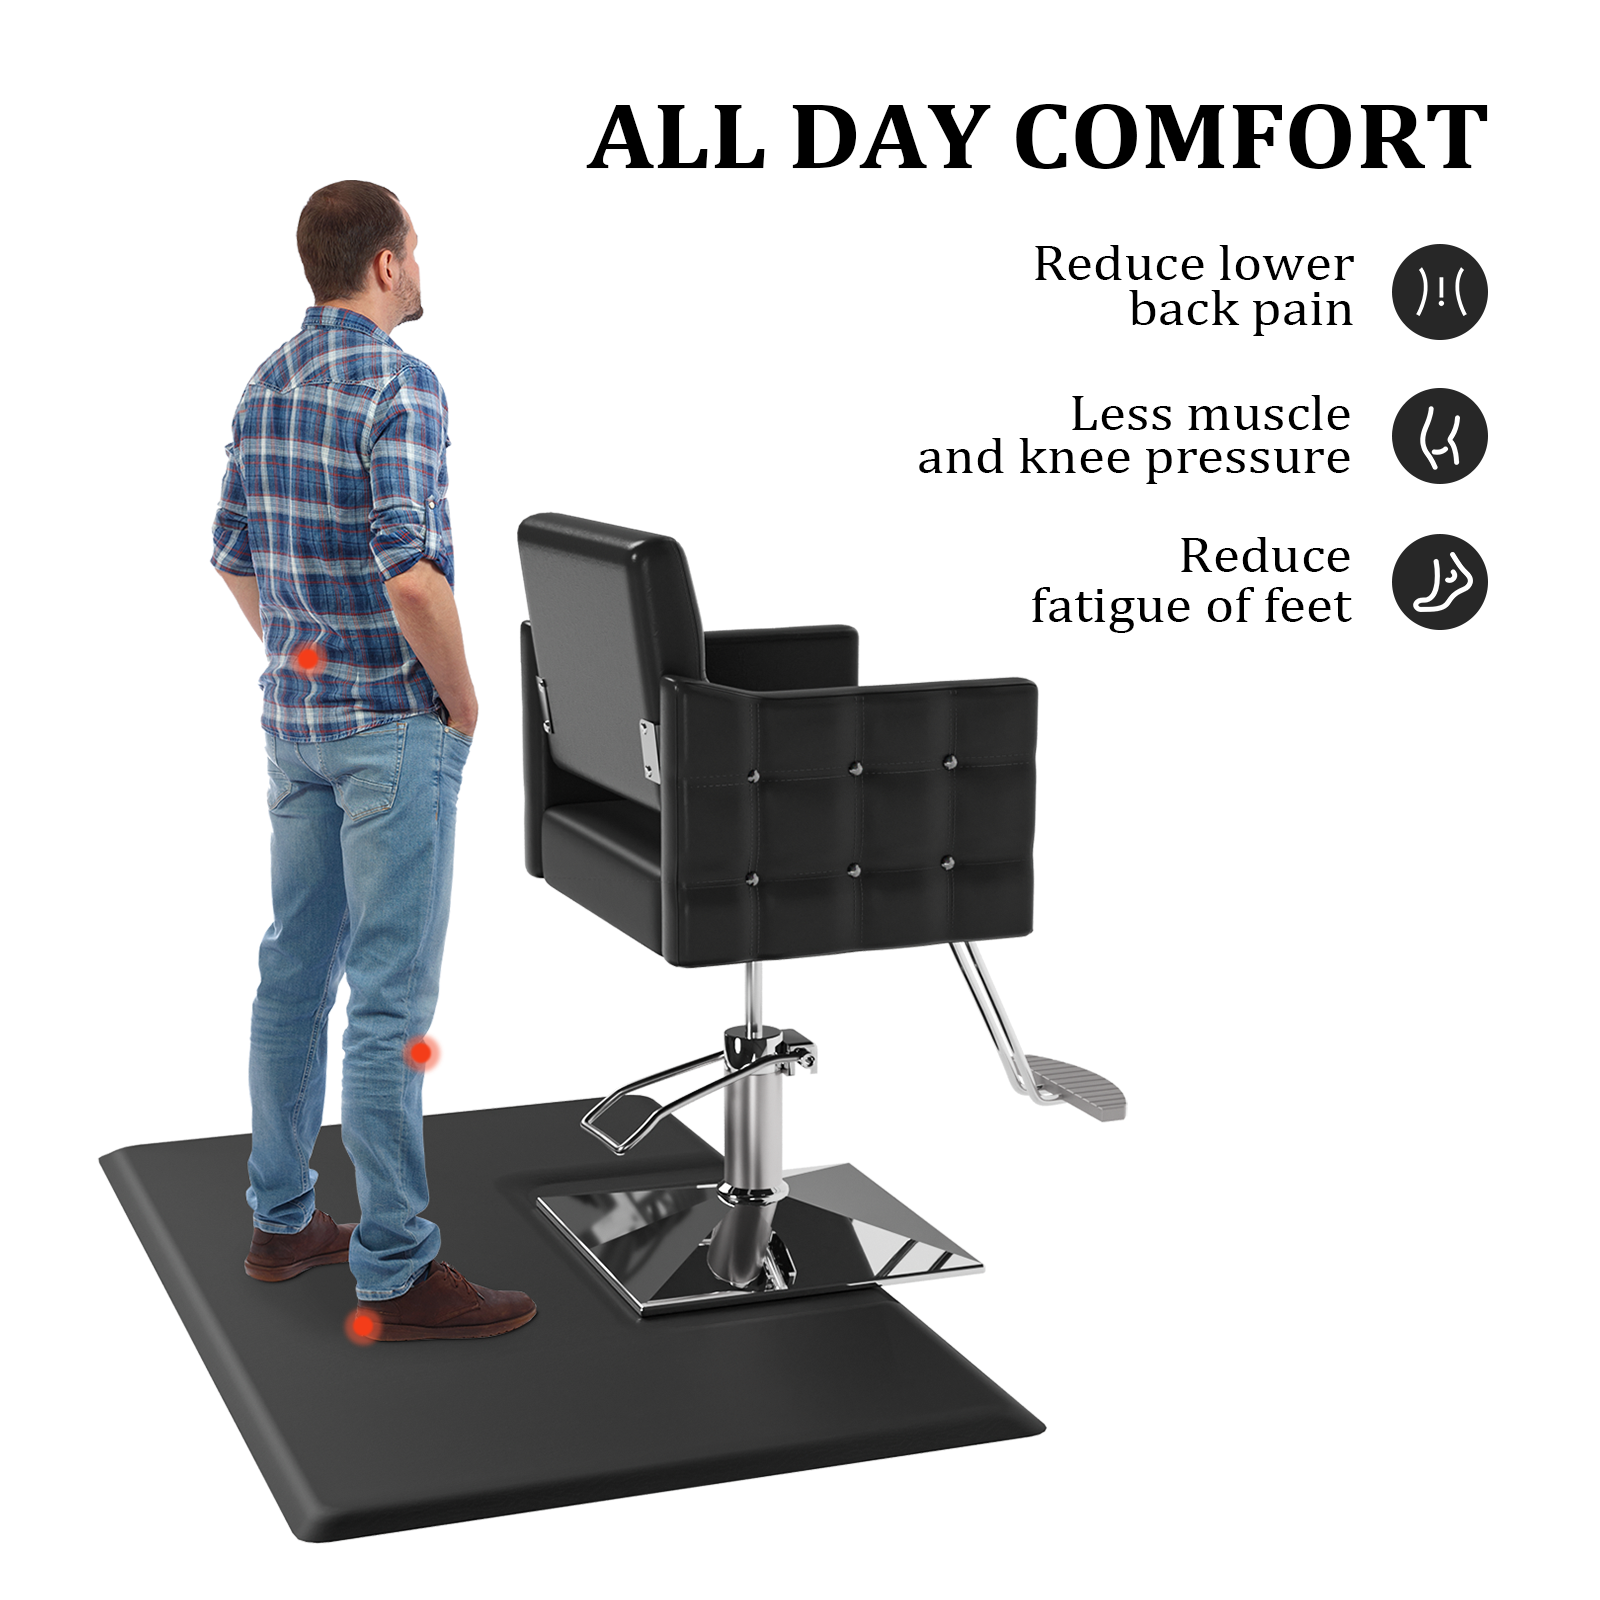 OmySalon Rectangle Anti Fatigue Mat Salon Barber Mat for Square Base Styling Chair 1/2in 3/4in Thick